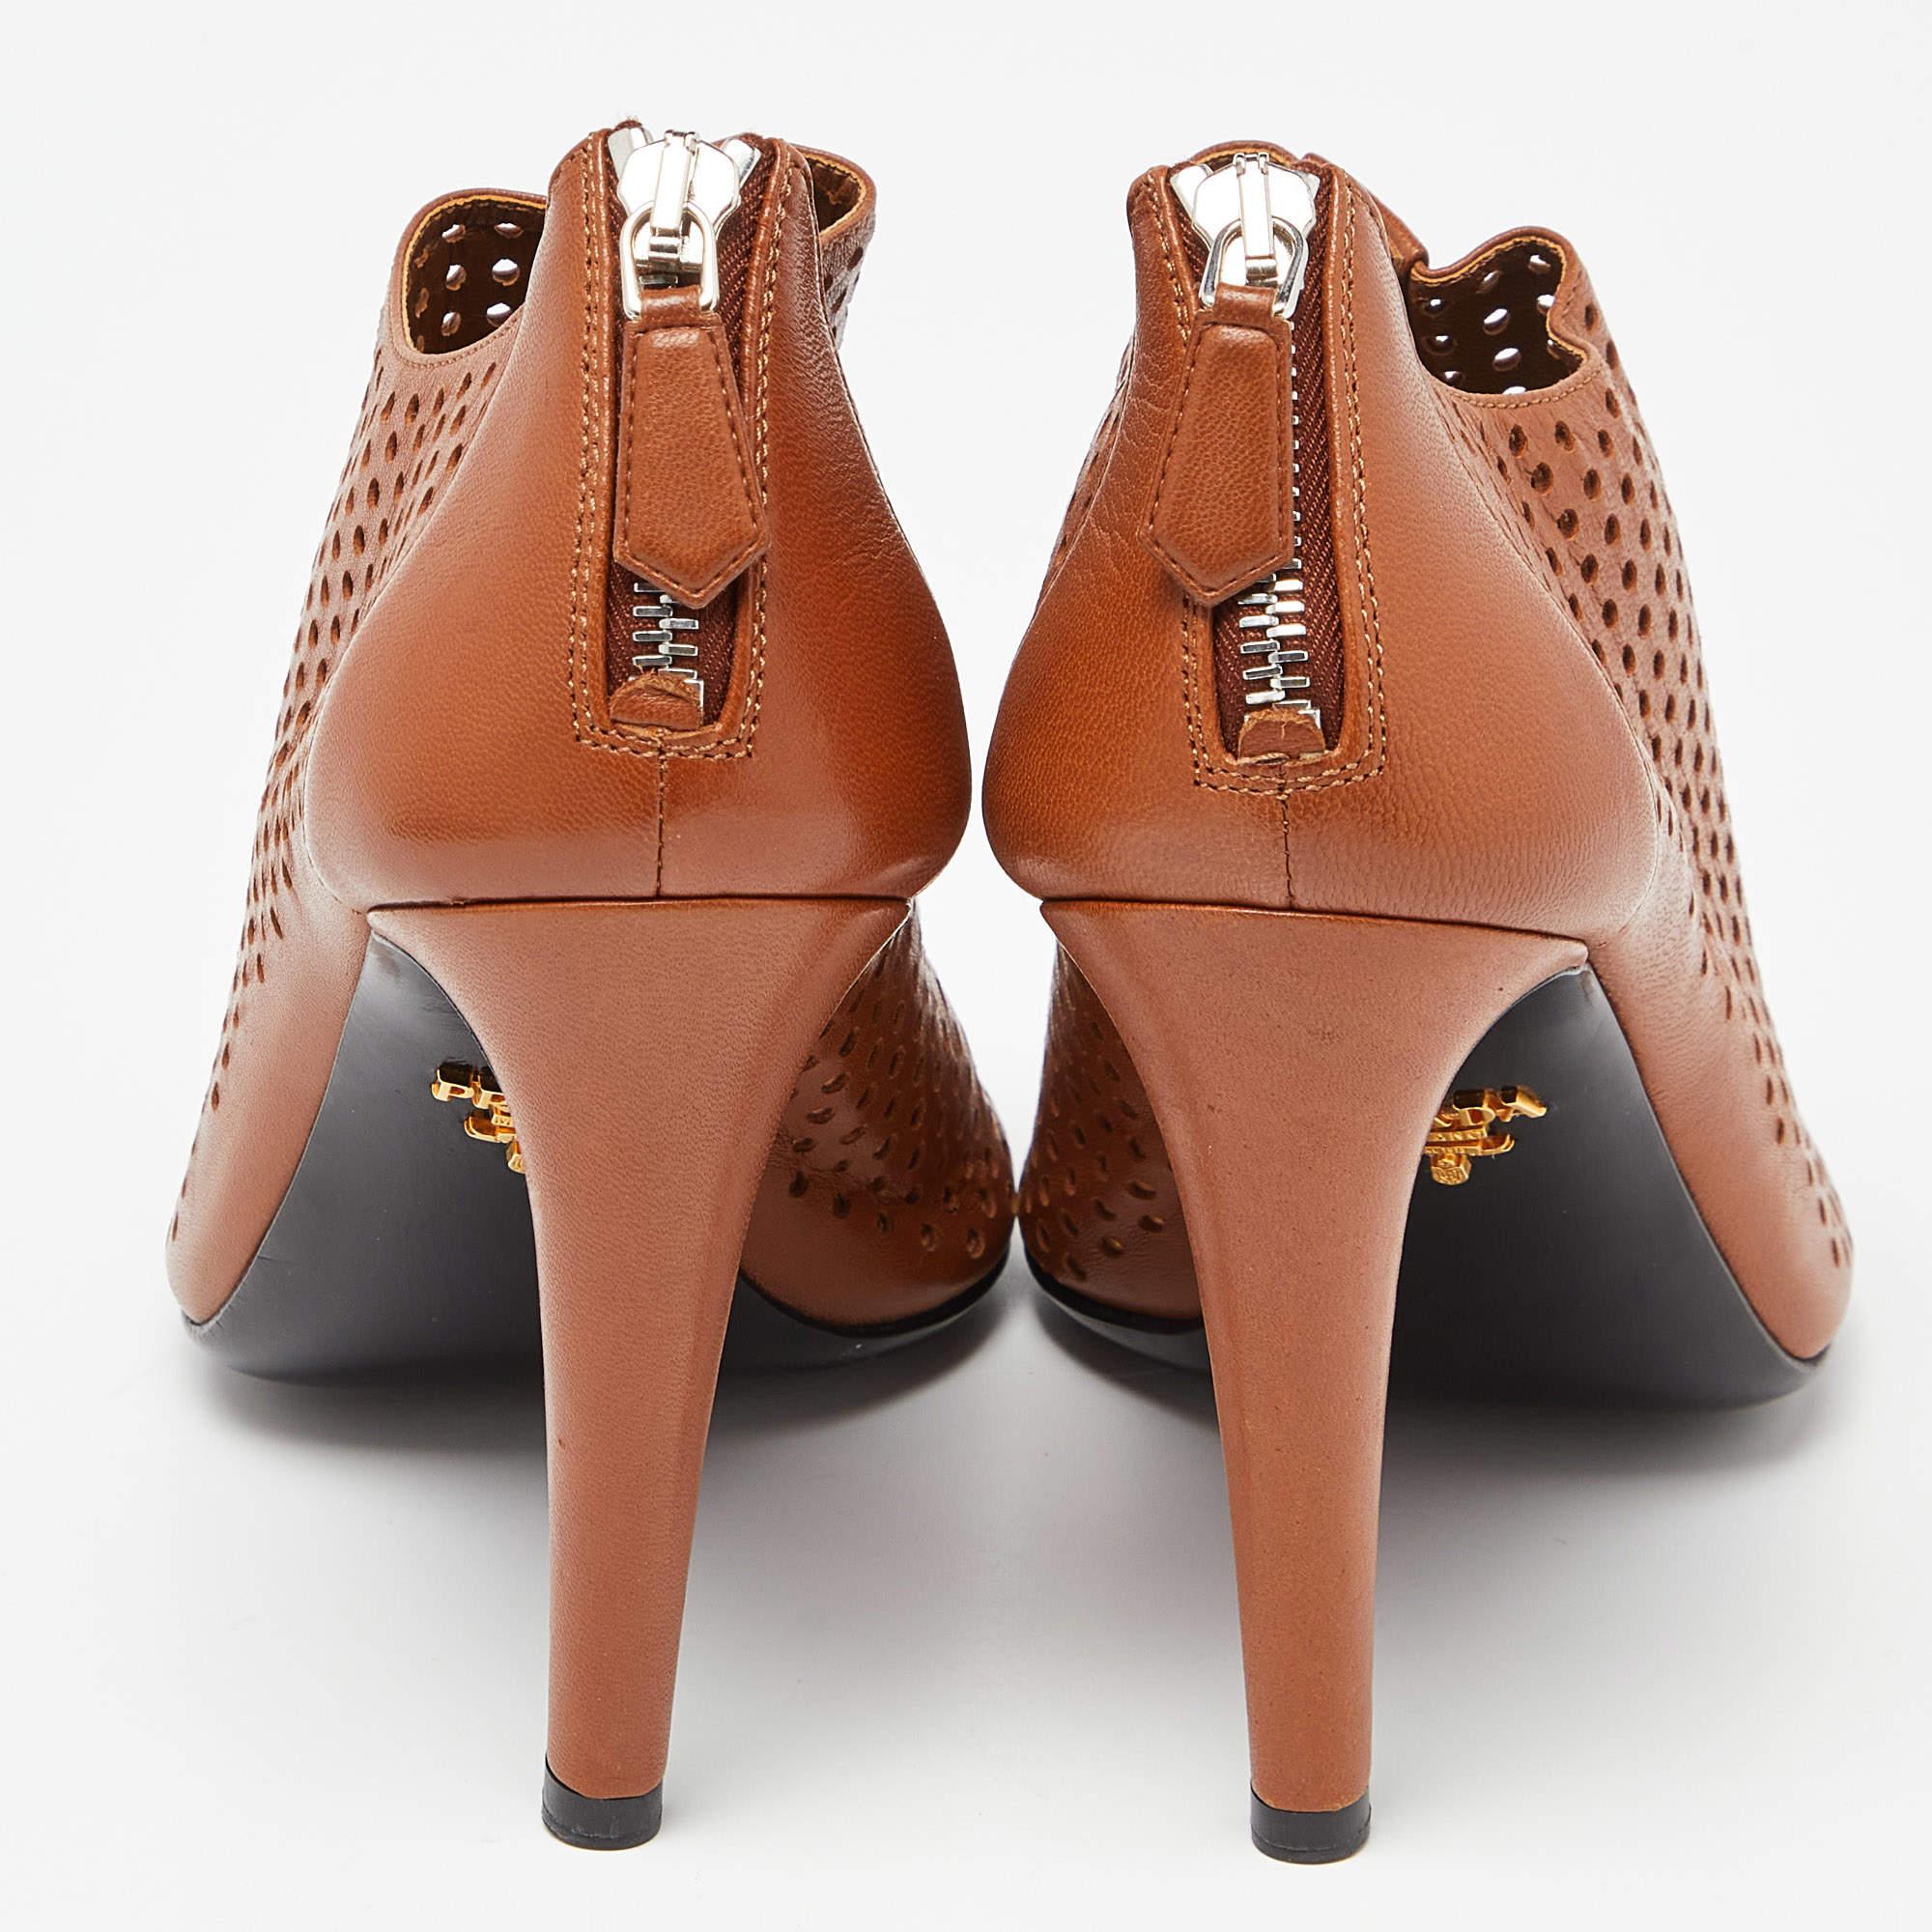 Prada Brown Perforated Leather Peep Toe Ankle Booties Size 39 2